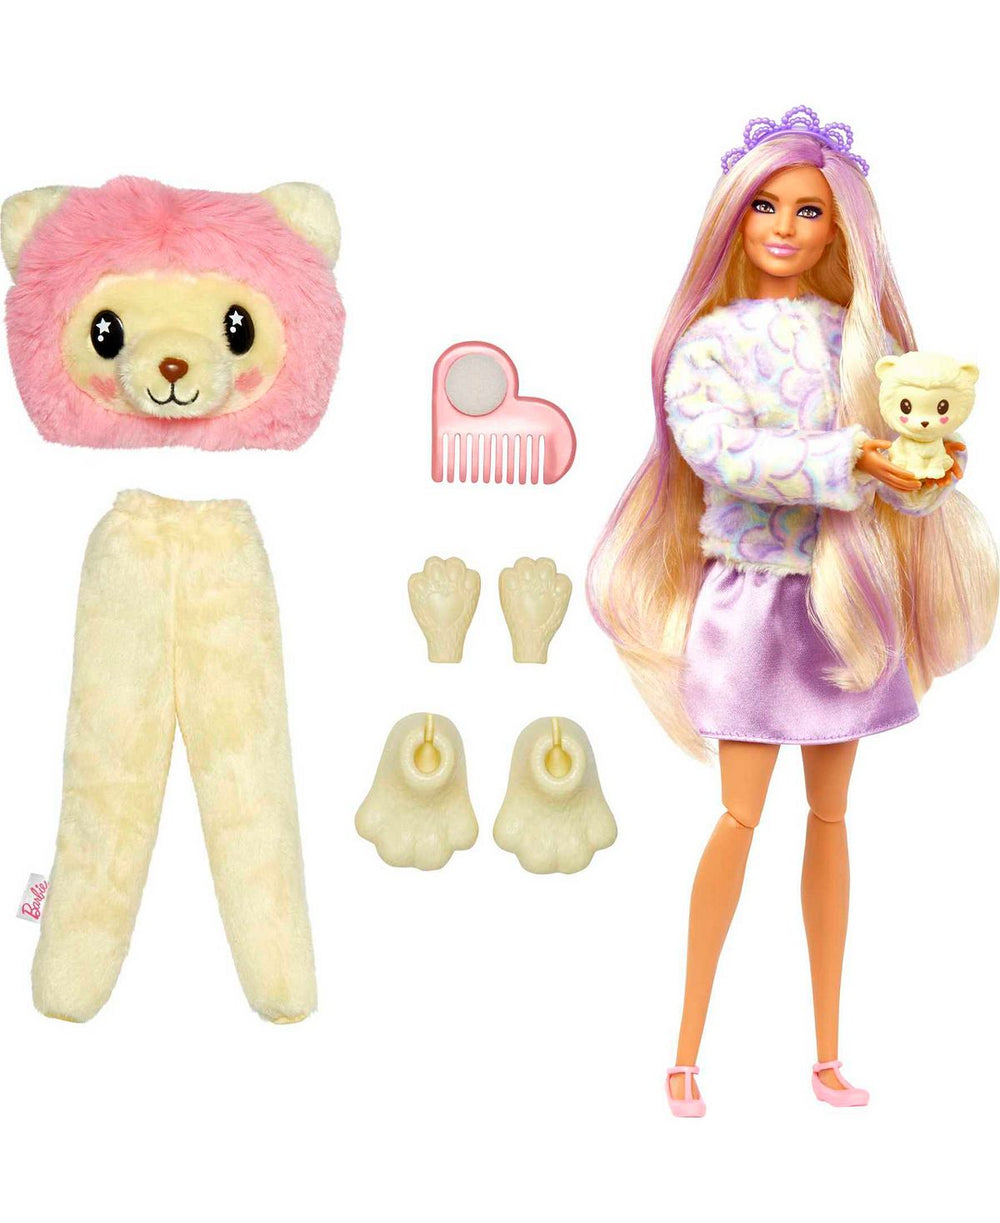 Barbie Cutie Reveal Doll with Cozy Cute Poodle Costume and Accessories